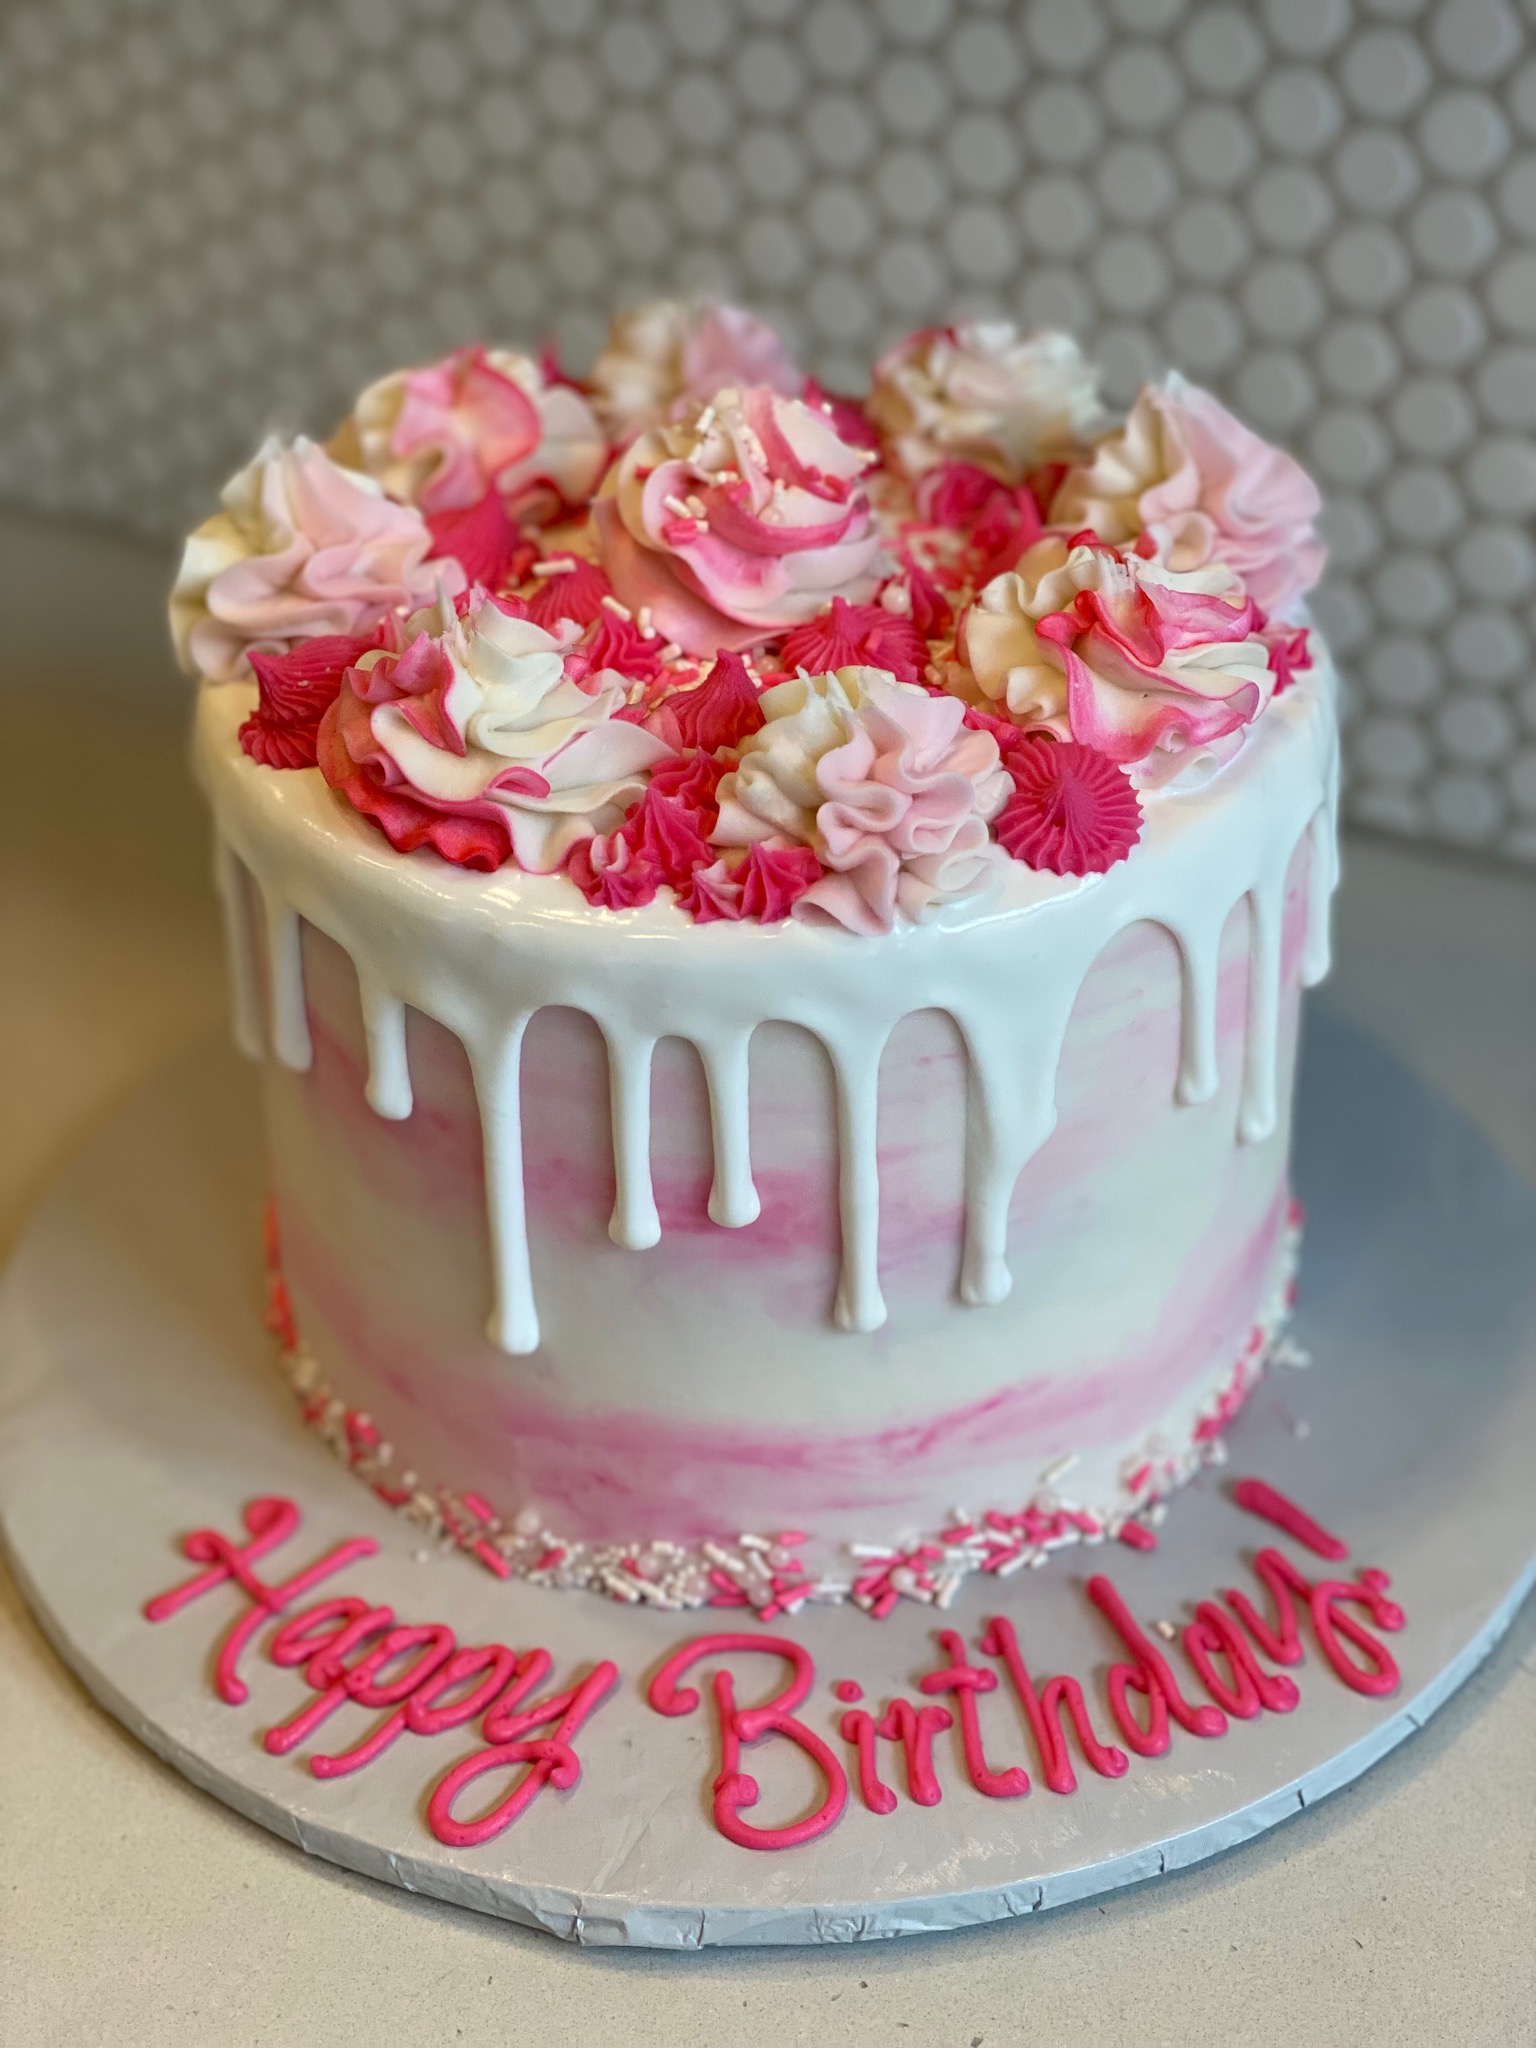 Round birthday cake intricately decorated with hand piped flowers filling the entire space of the top of the cake. Deep pinks to lighter pinks and white rose-style flower designs. The cake has the thick white icing from the top layer spilling over the edges to form a beautiful drop effect over the white and pink marbled, smoothly iced, sides of the cake. The bottom edge is finished with white and pinks sprinkles and the cake board features the piped message of Happy Birthday!